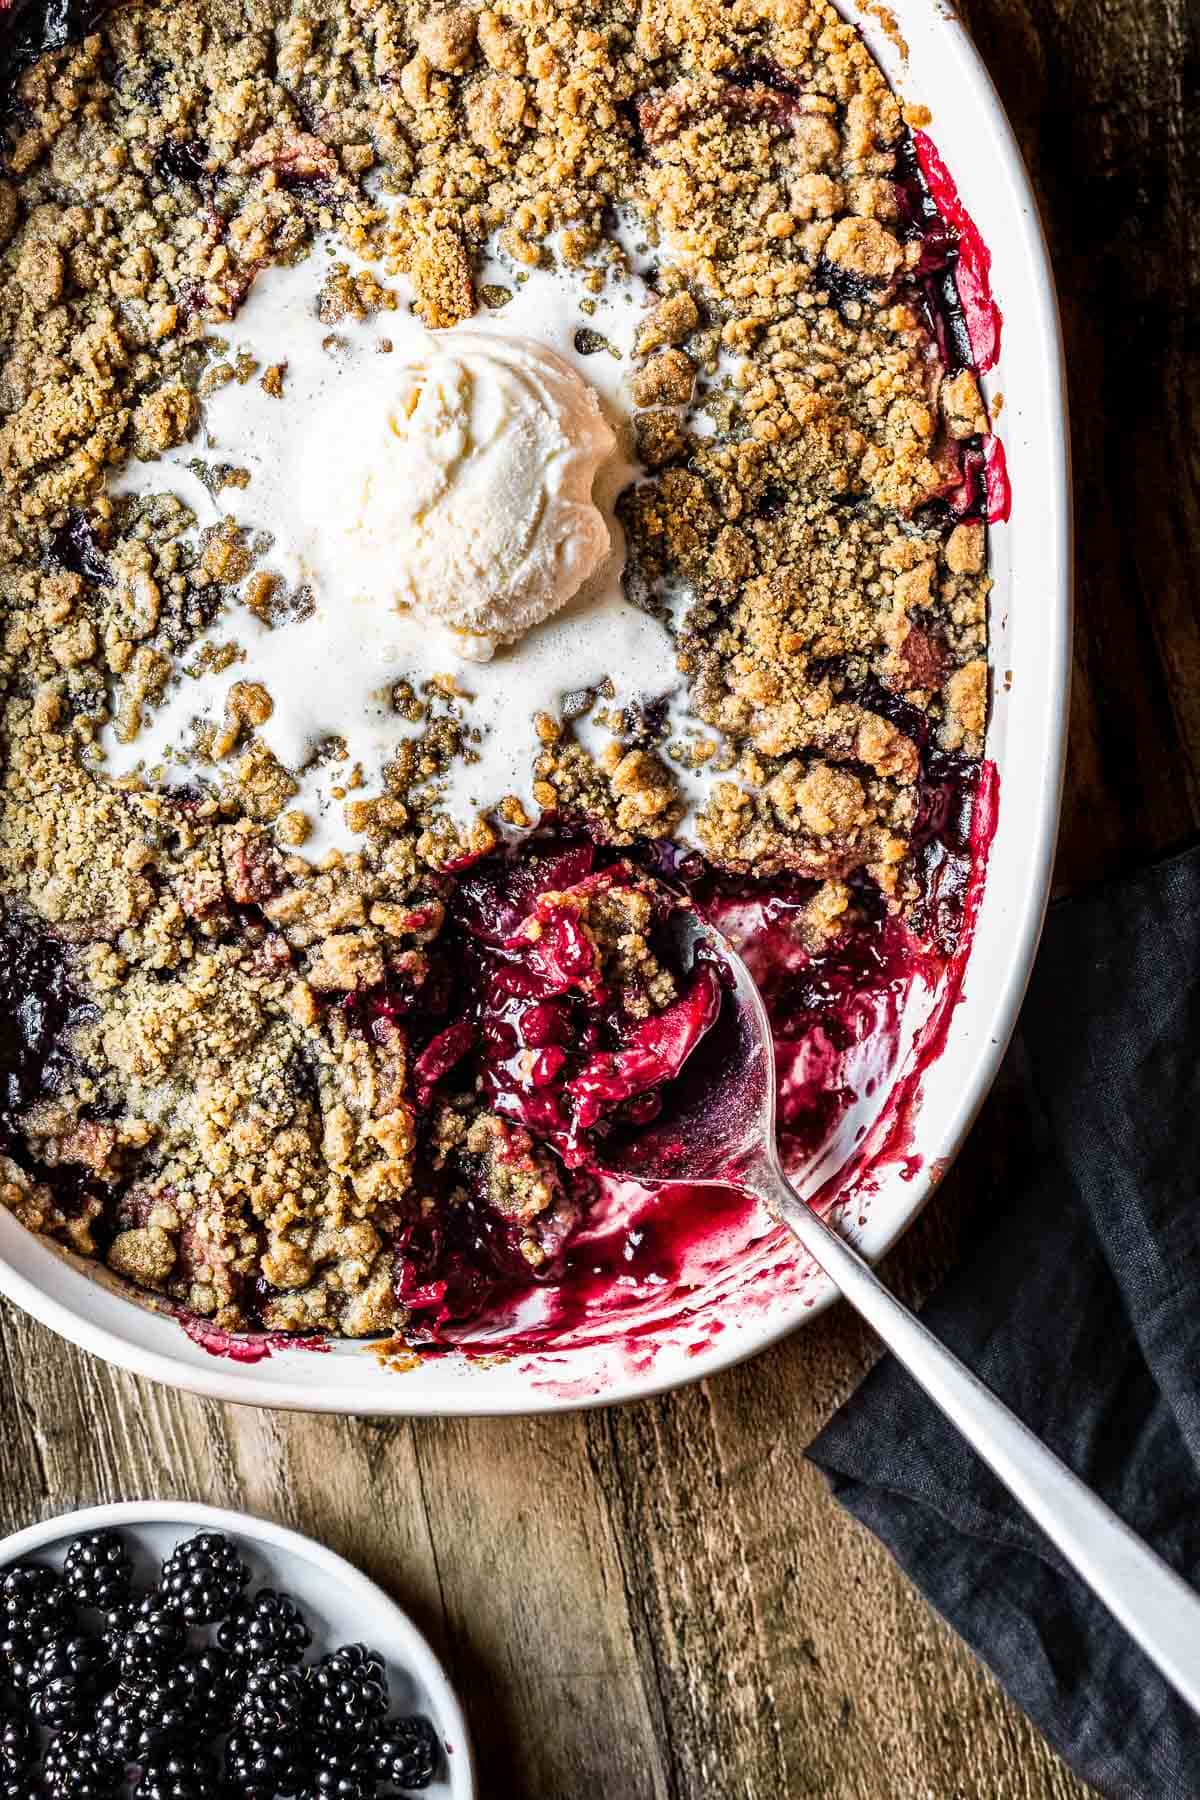 Apple and berry crumble in a white ceramic dish with a spoon and a scoop of vanilla ice cream on top. The table underneath is rustic wood.